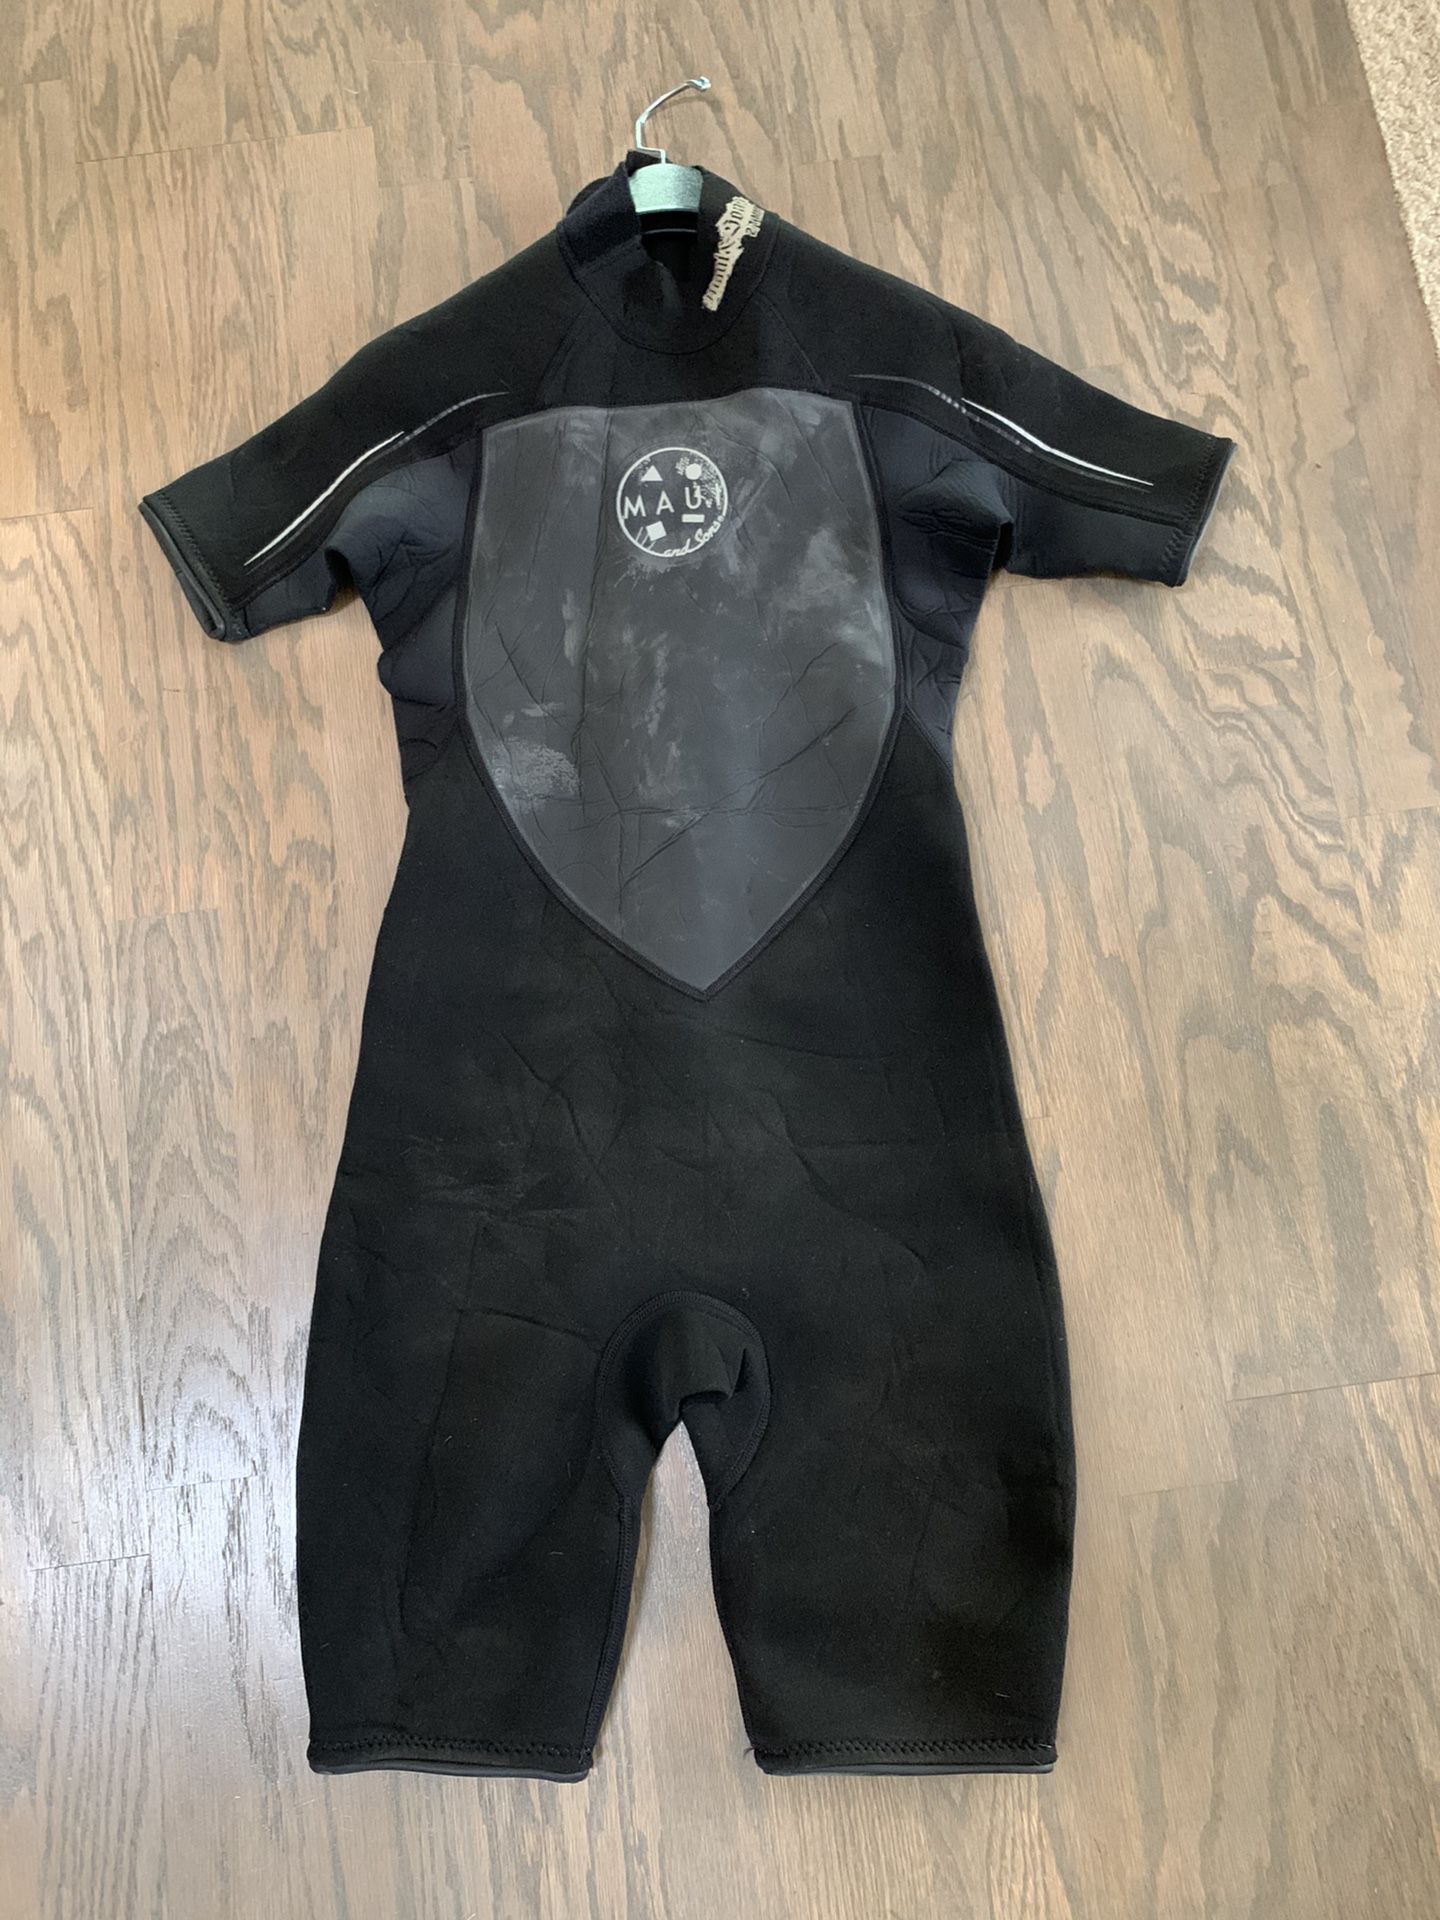 Maui and Sons wetsuit kids youth size 14 black 2:1 mm